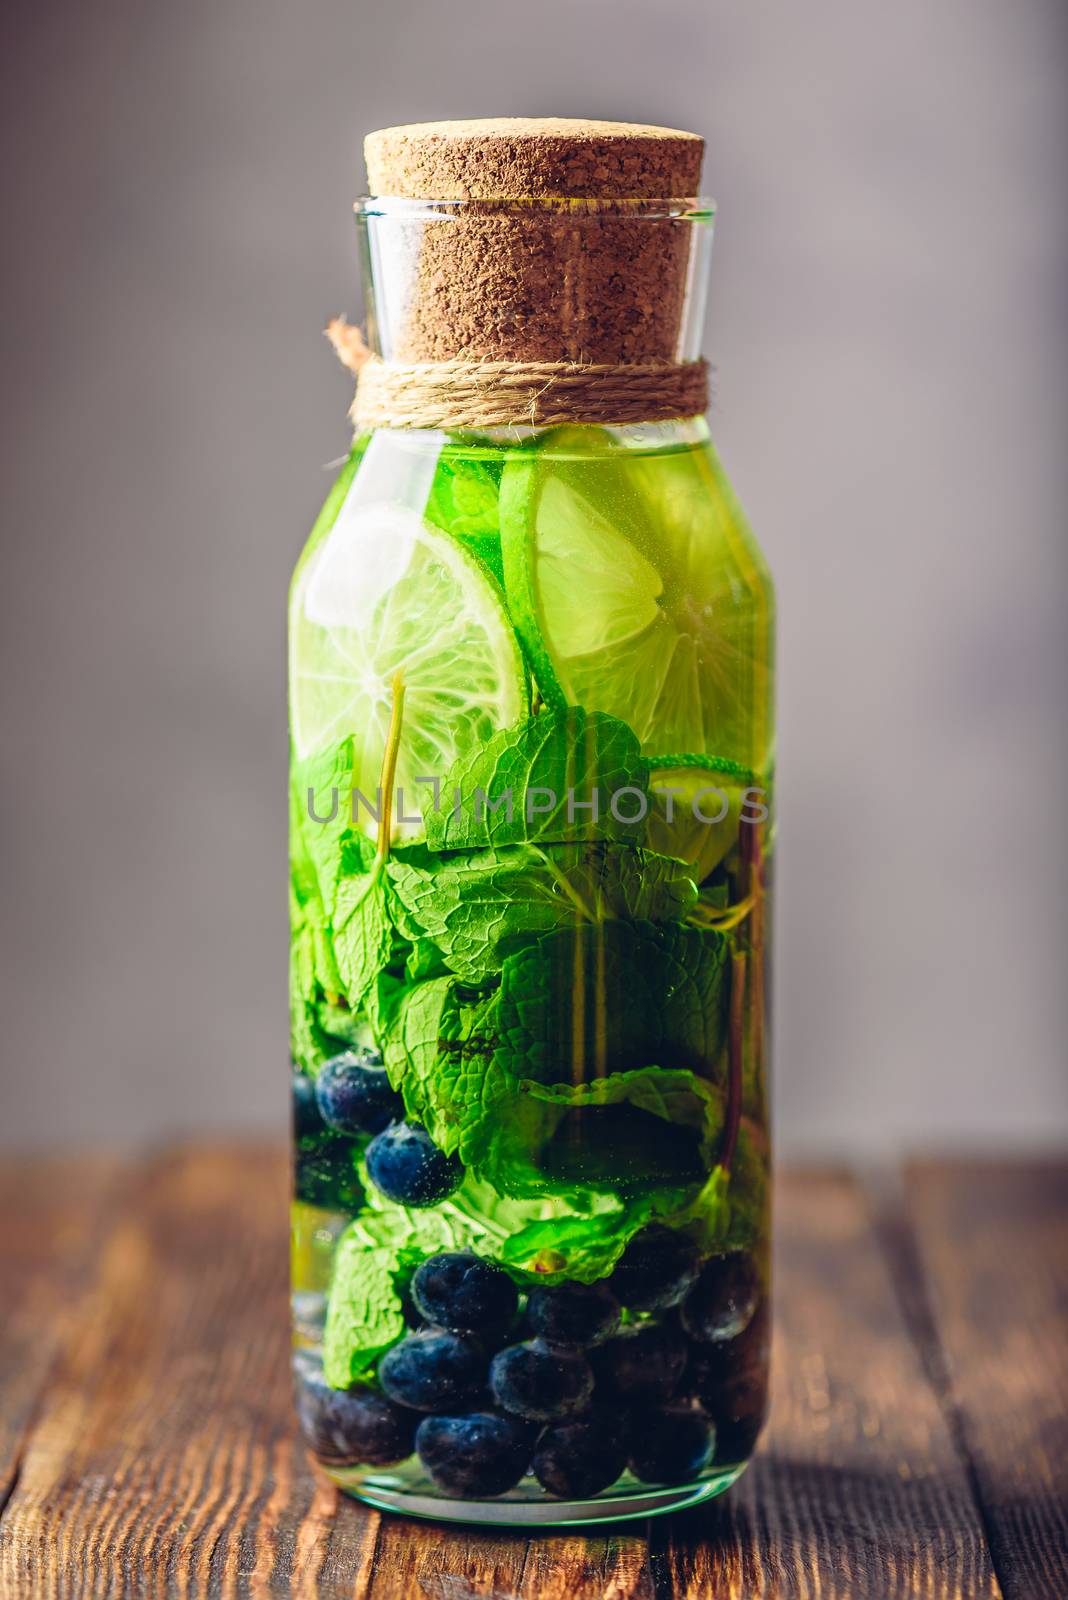 Bottle of Cleansing Water with Lime, Mint and Blueberry. Vertical Orientation.